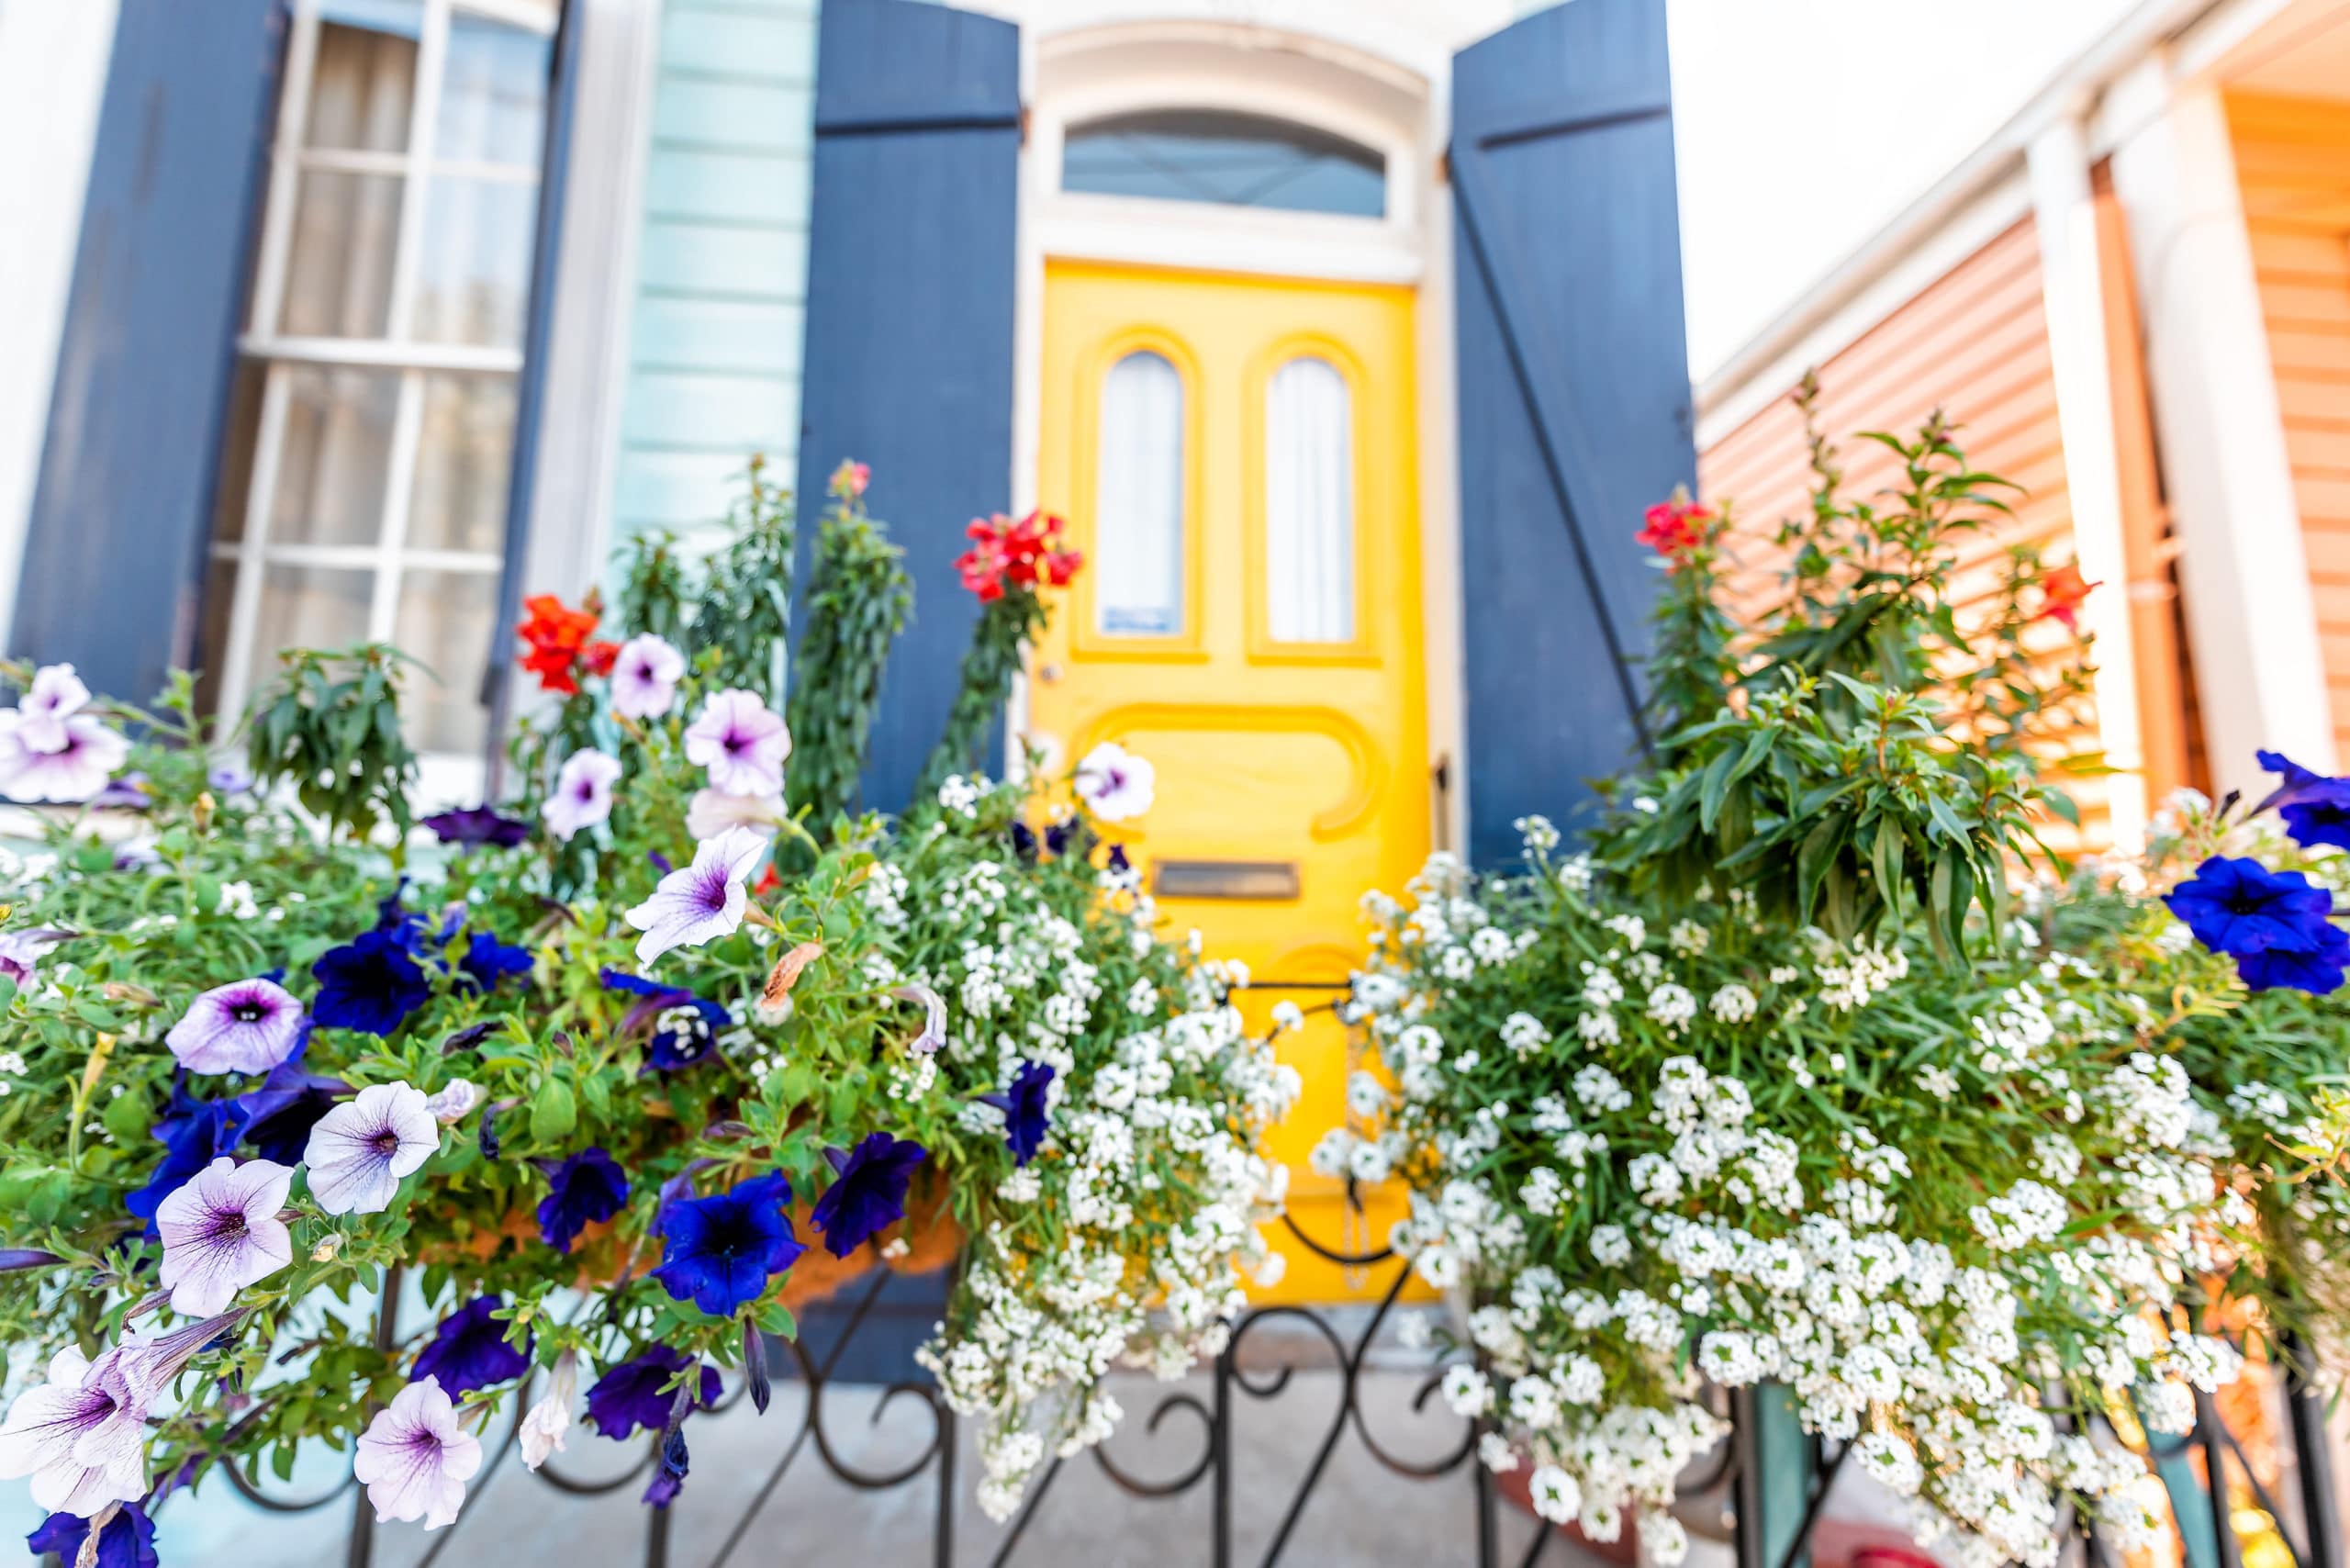 a yellow door with blue shutters is surrounded by flowers